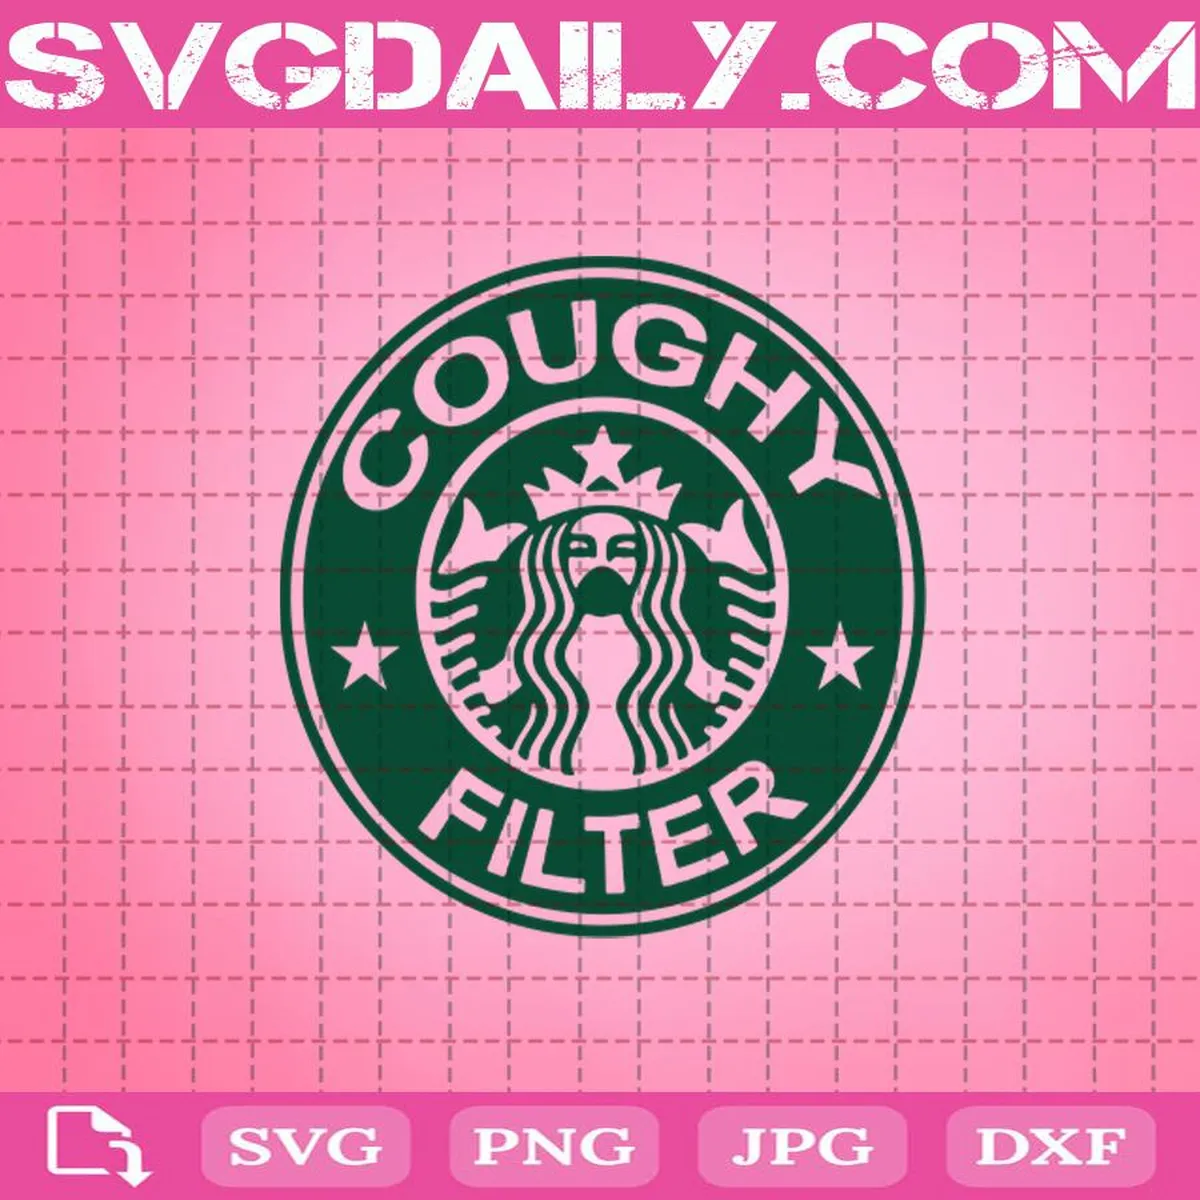 Coughy Filter Starbucks Coffee Face Masks Svg, Coffee Svg, Starbucks Svg, Face Masks Svg, Coughy Filter Svg, Starbucks Coughy Filter Svg